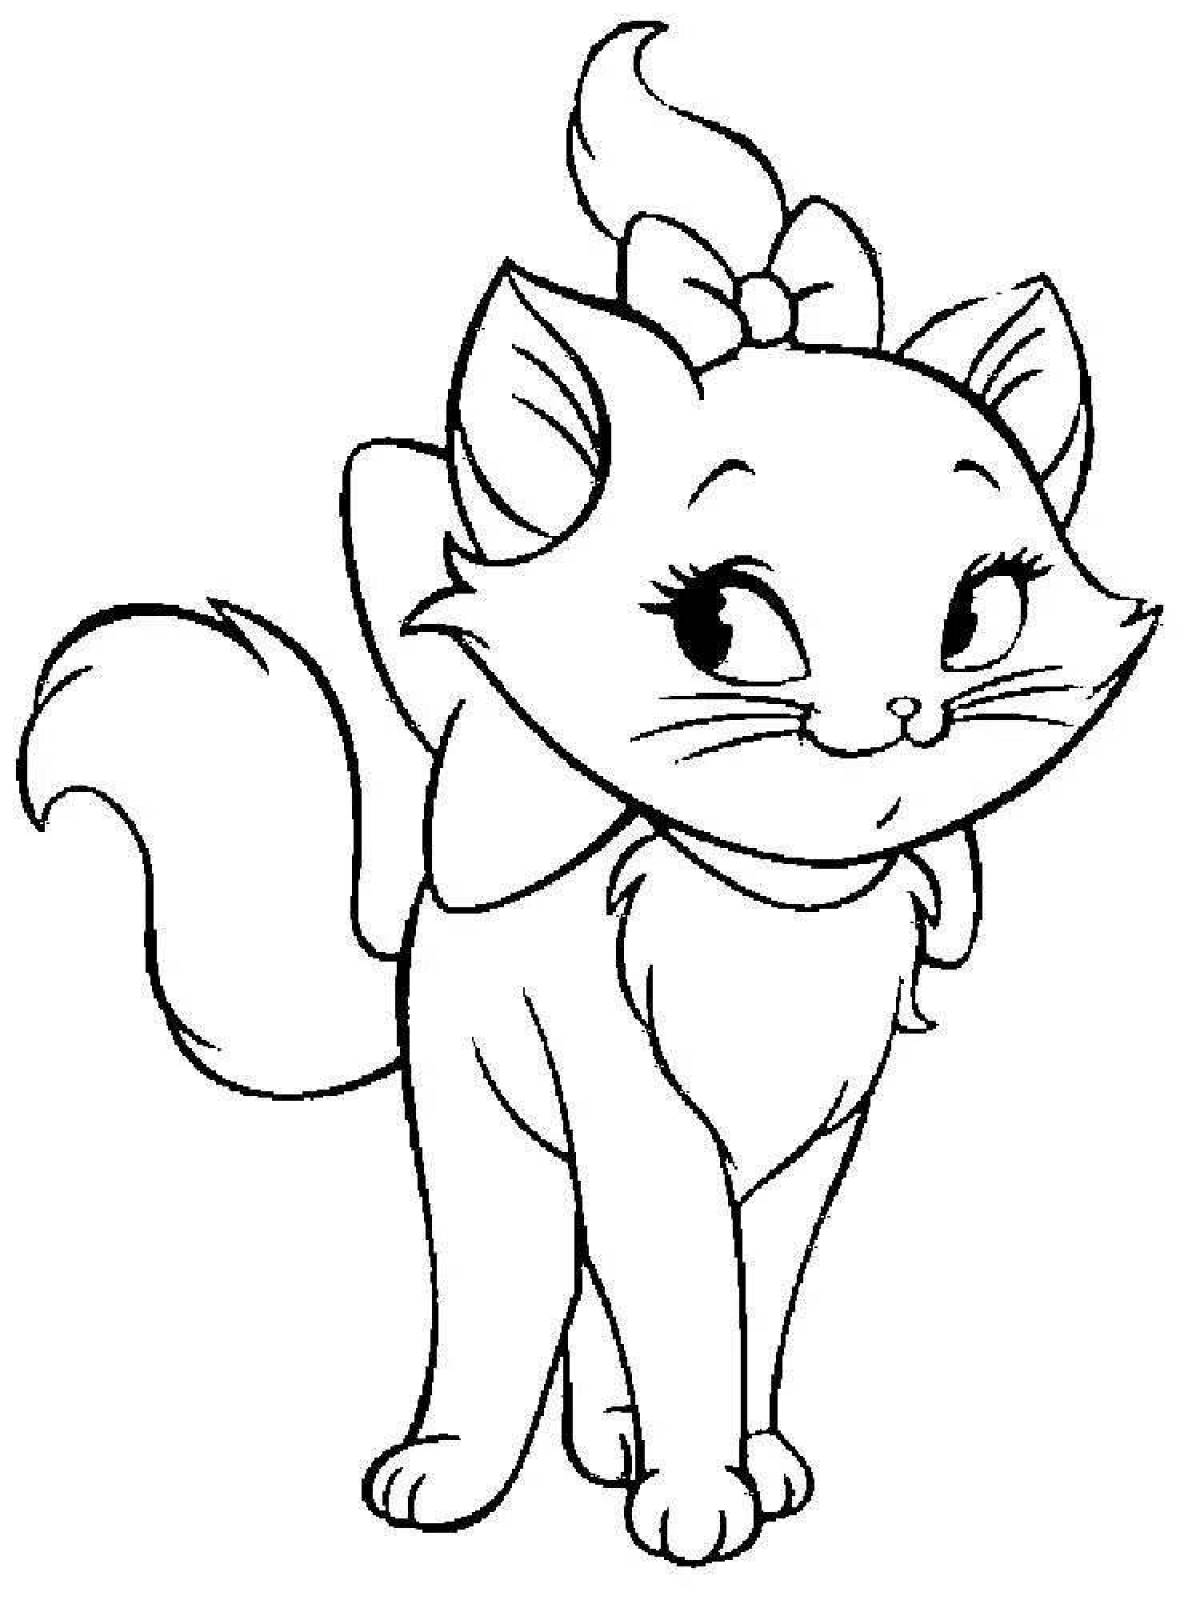 Coloring cat with a bow